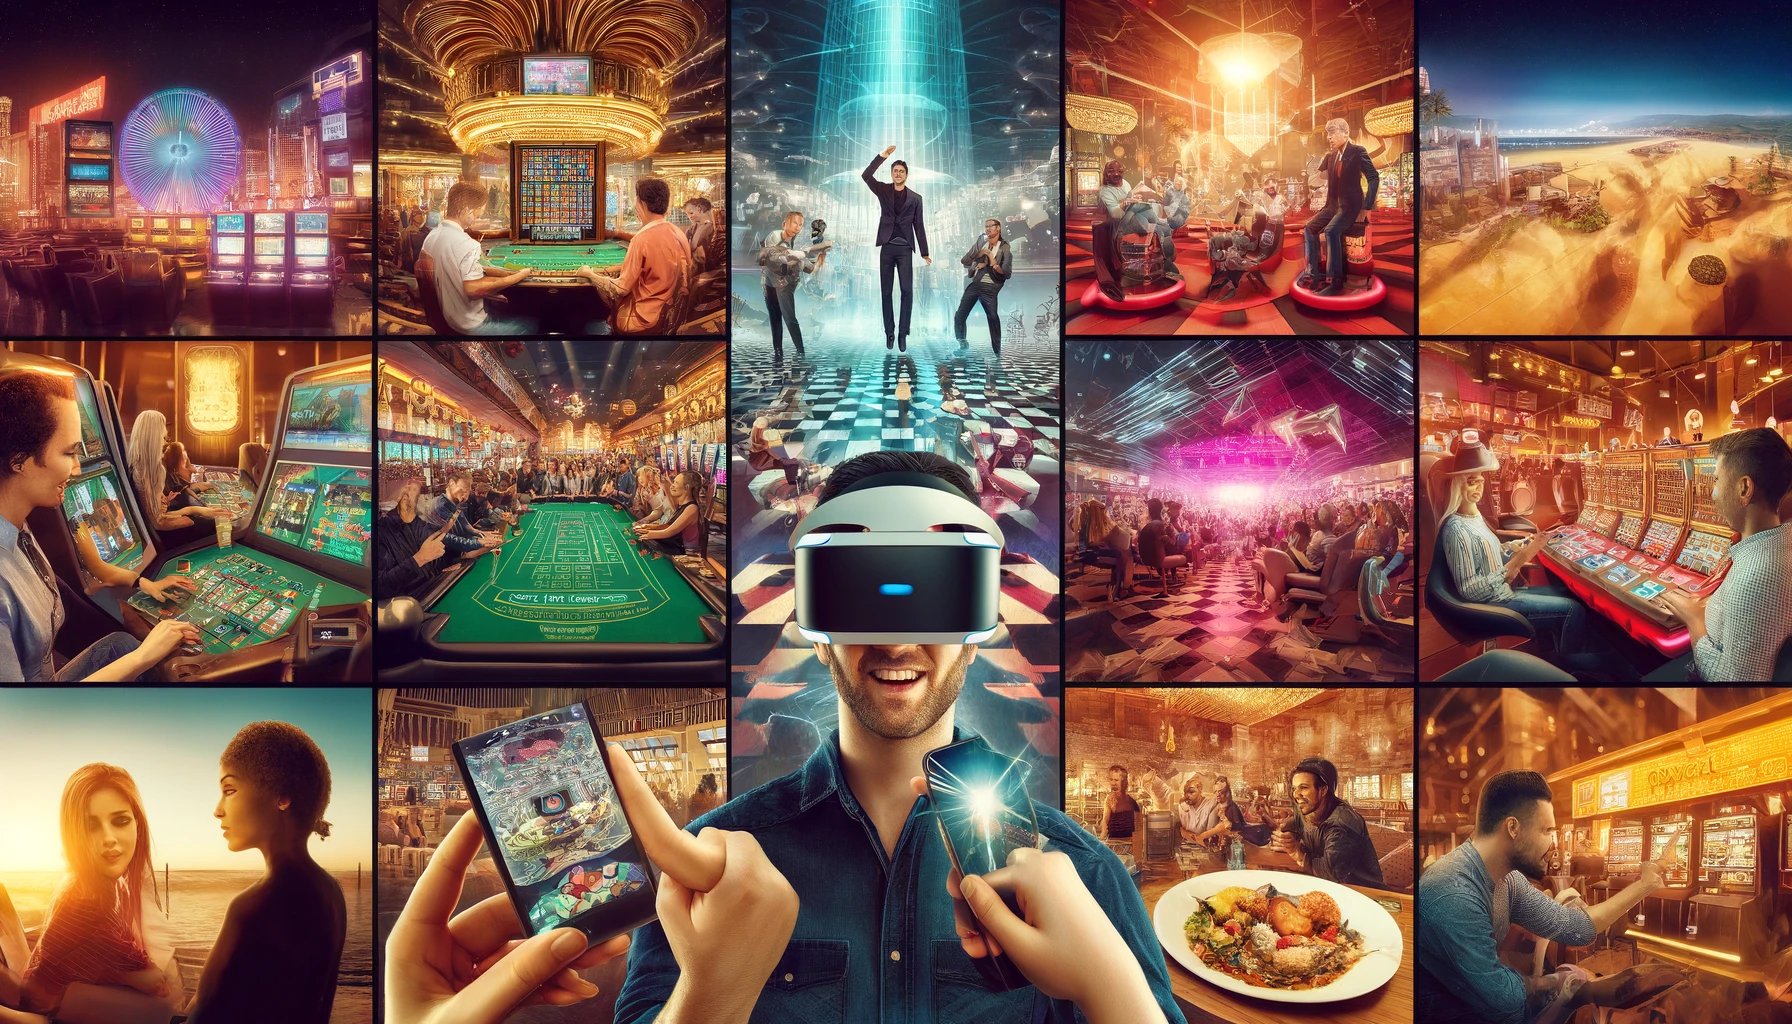 Vibrant casino floor with VR gaming, people using smartphones, live music performance, themed attraction, gourmet meal, and friends playing poker.